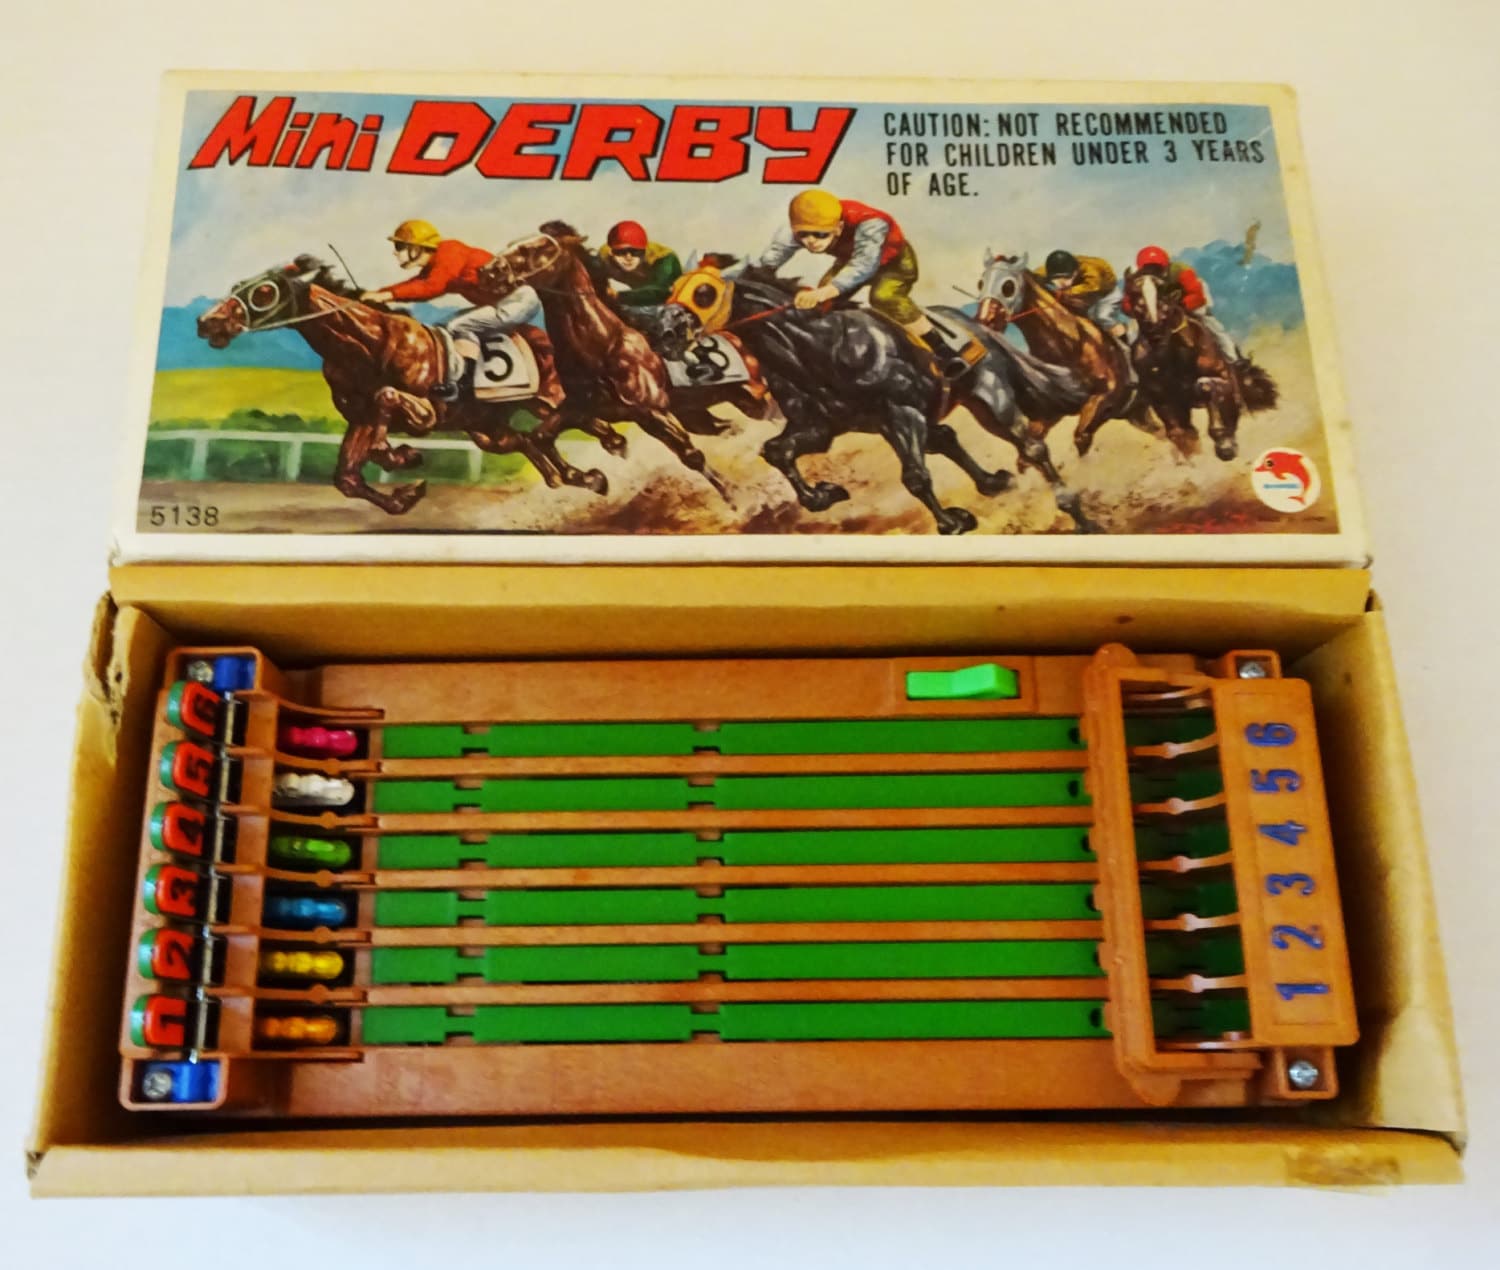 Vintage Mini Derby Horse Racing Game Toy by Shinsei Japan